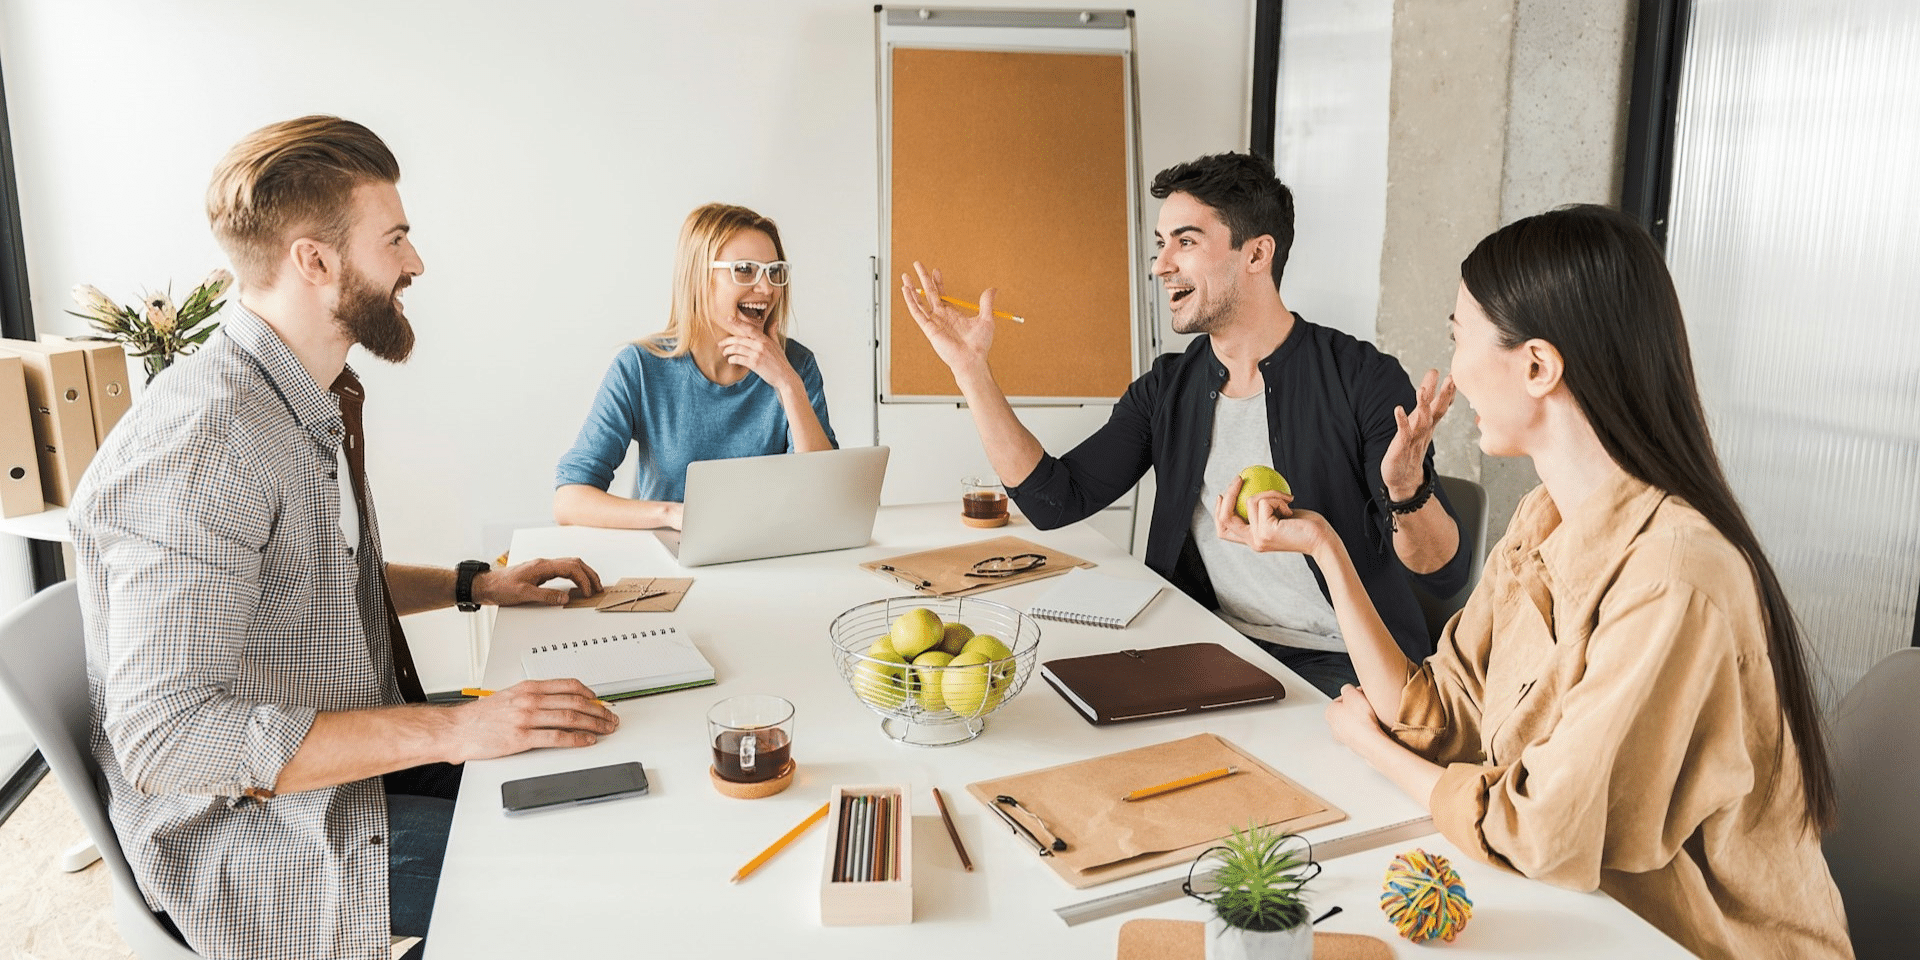 The Impact of Workplace Camaraderie on Office Productivity